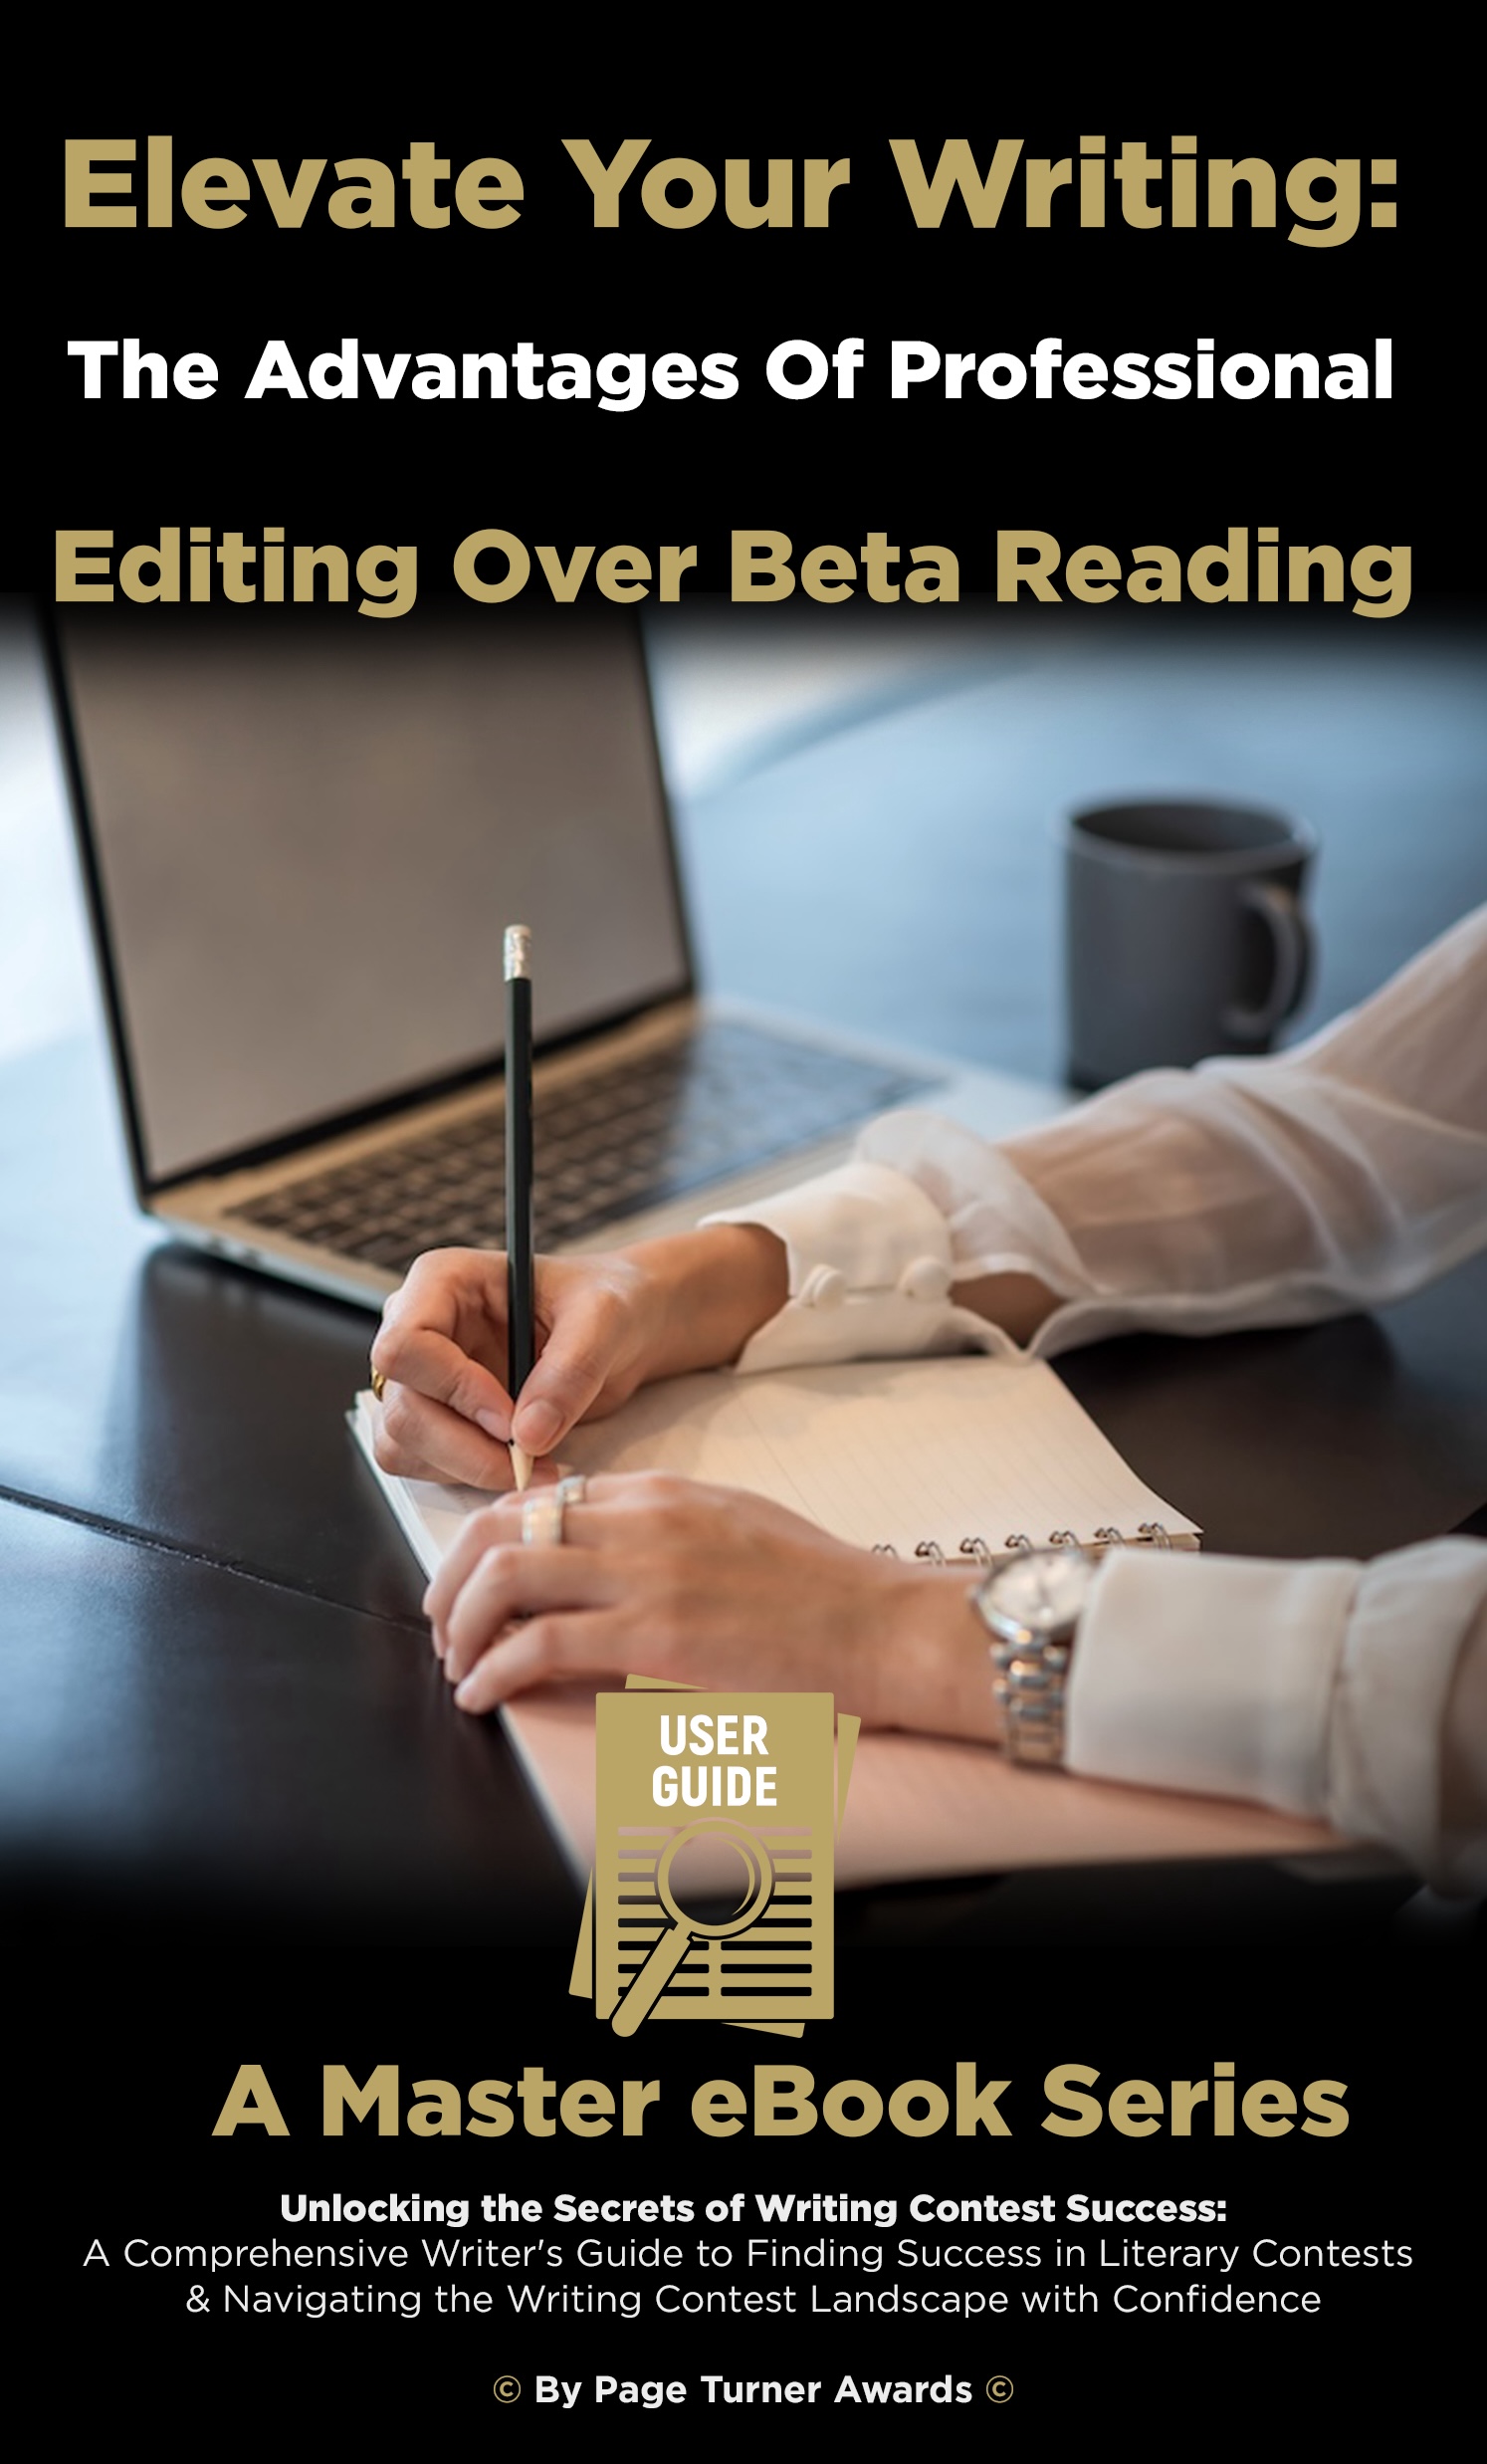 Elevate Your Writing: The Advantages Of Professional Editing Over Beta Reading